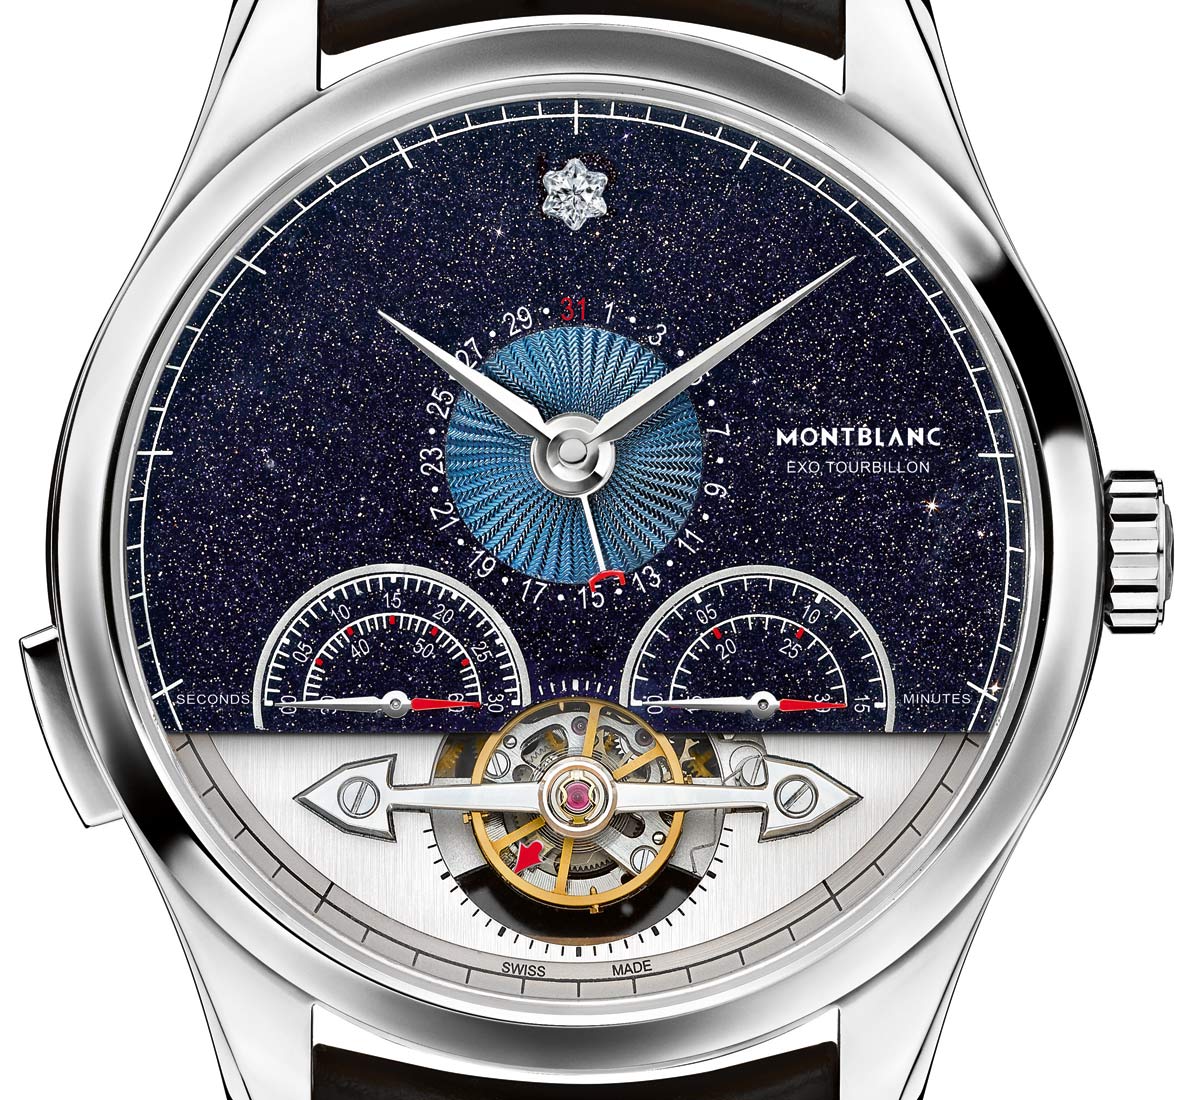 MONTBLANC HERITAGE CHRONOMETRIE QUANTIÈME ANNUEL VASCO DA GAMA LIMITED  EDITION 112536: retail price, second hand price, specifications and reviews  - AskMe.Watch